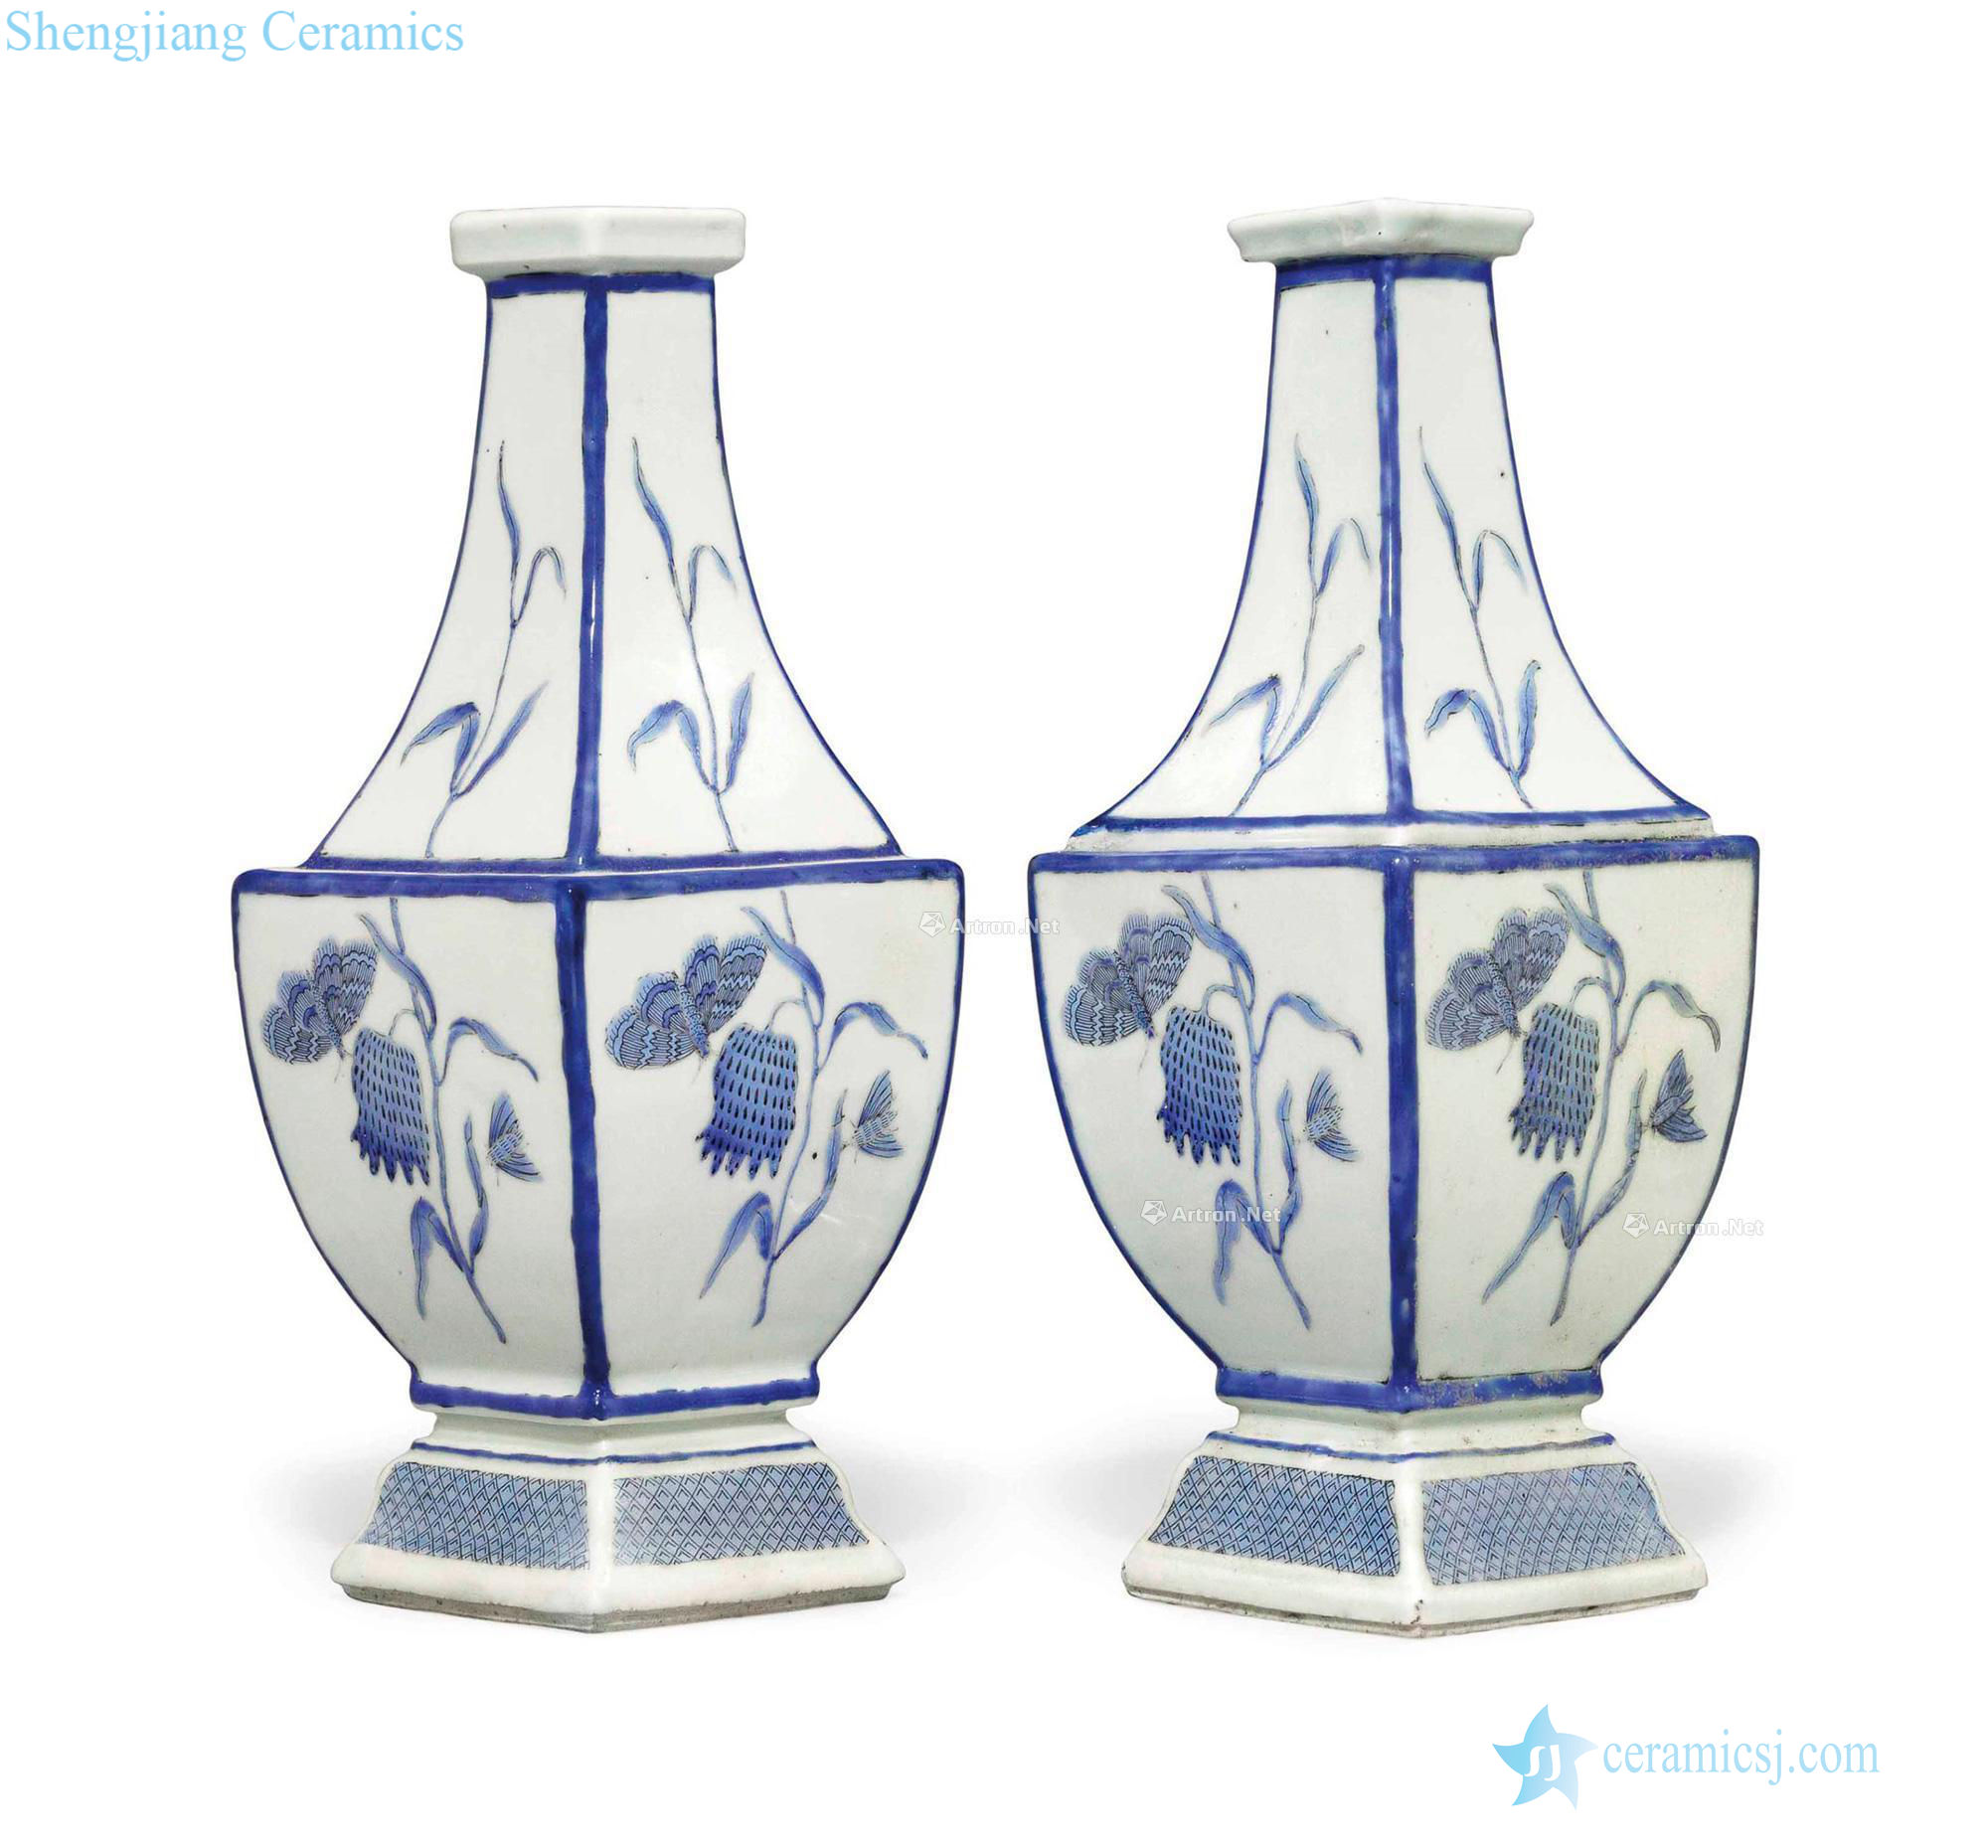 The early qianlong, A PAIR OF about 1740 'PRONK TYPE BLUE ENAMEL VASES